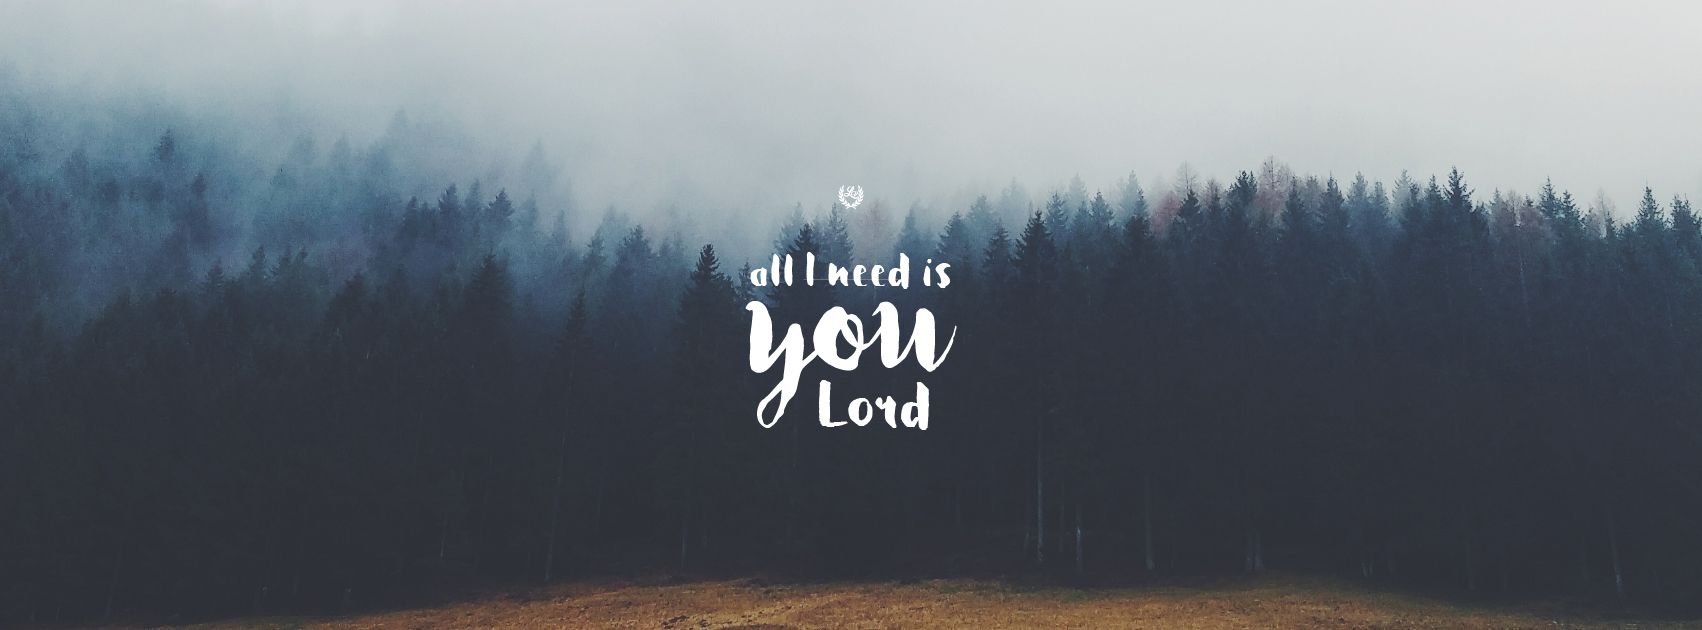 All I Need Is You By Hillsong United // Facebook Cover - Hillsong United Facebook Cover , HD Wallpaper & Backgrounds